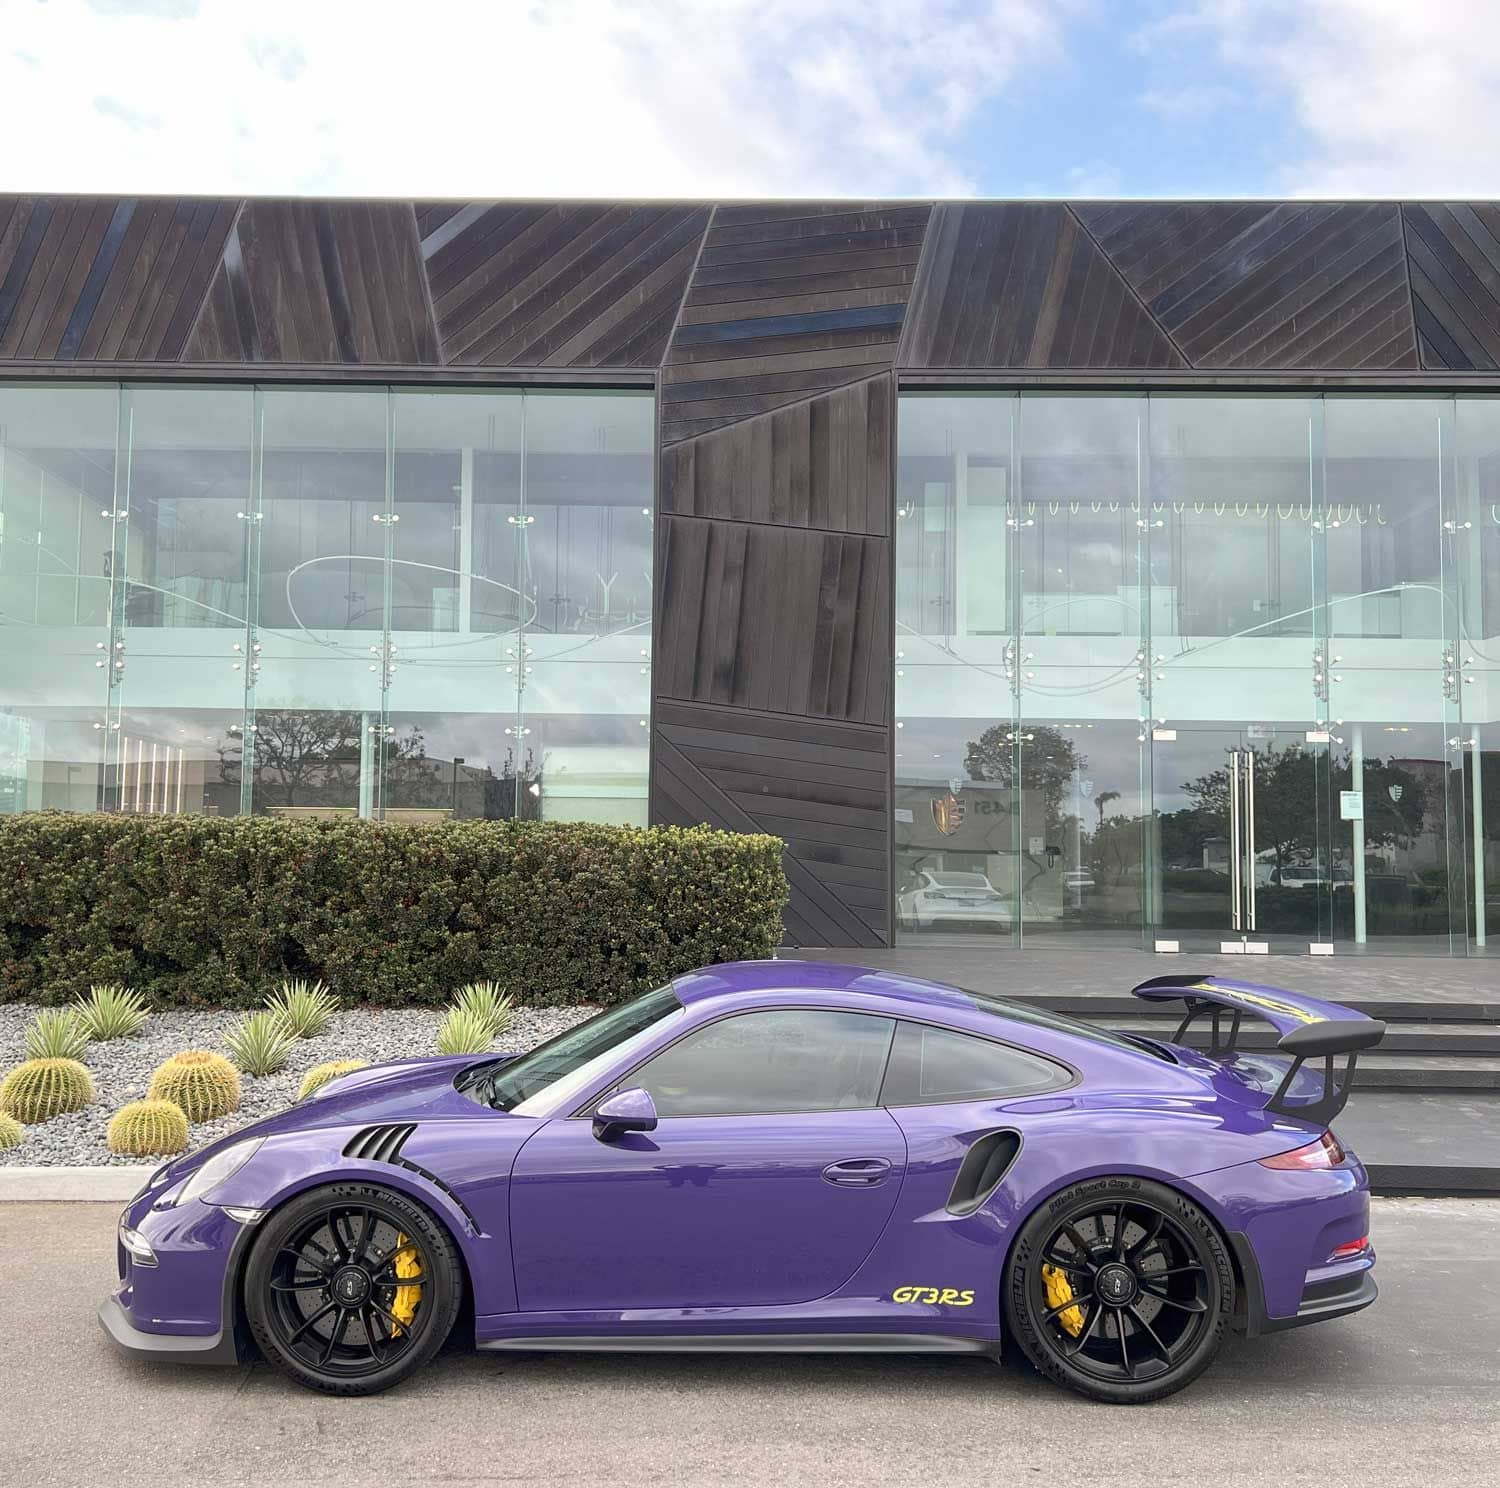 2016 Porsche 911 - GT3 RS 2016 UV CXX Full PPF - Used - VIN WPAF2A96GS193118 - 18,550 Miles - 6 cyl - 2WD - Automatic - Coupe - Purple - La Jolla, CA 92111, United States